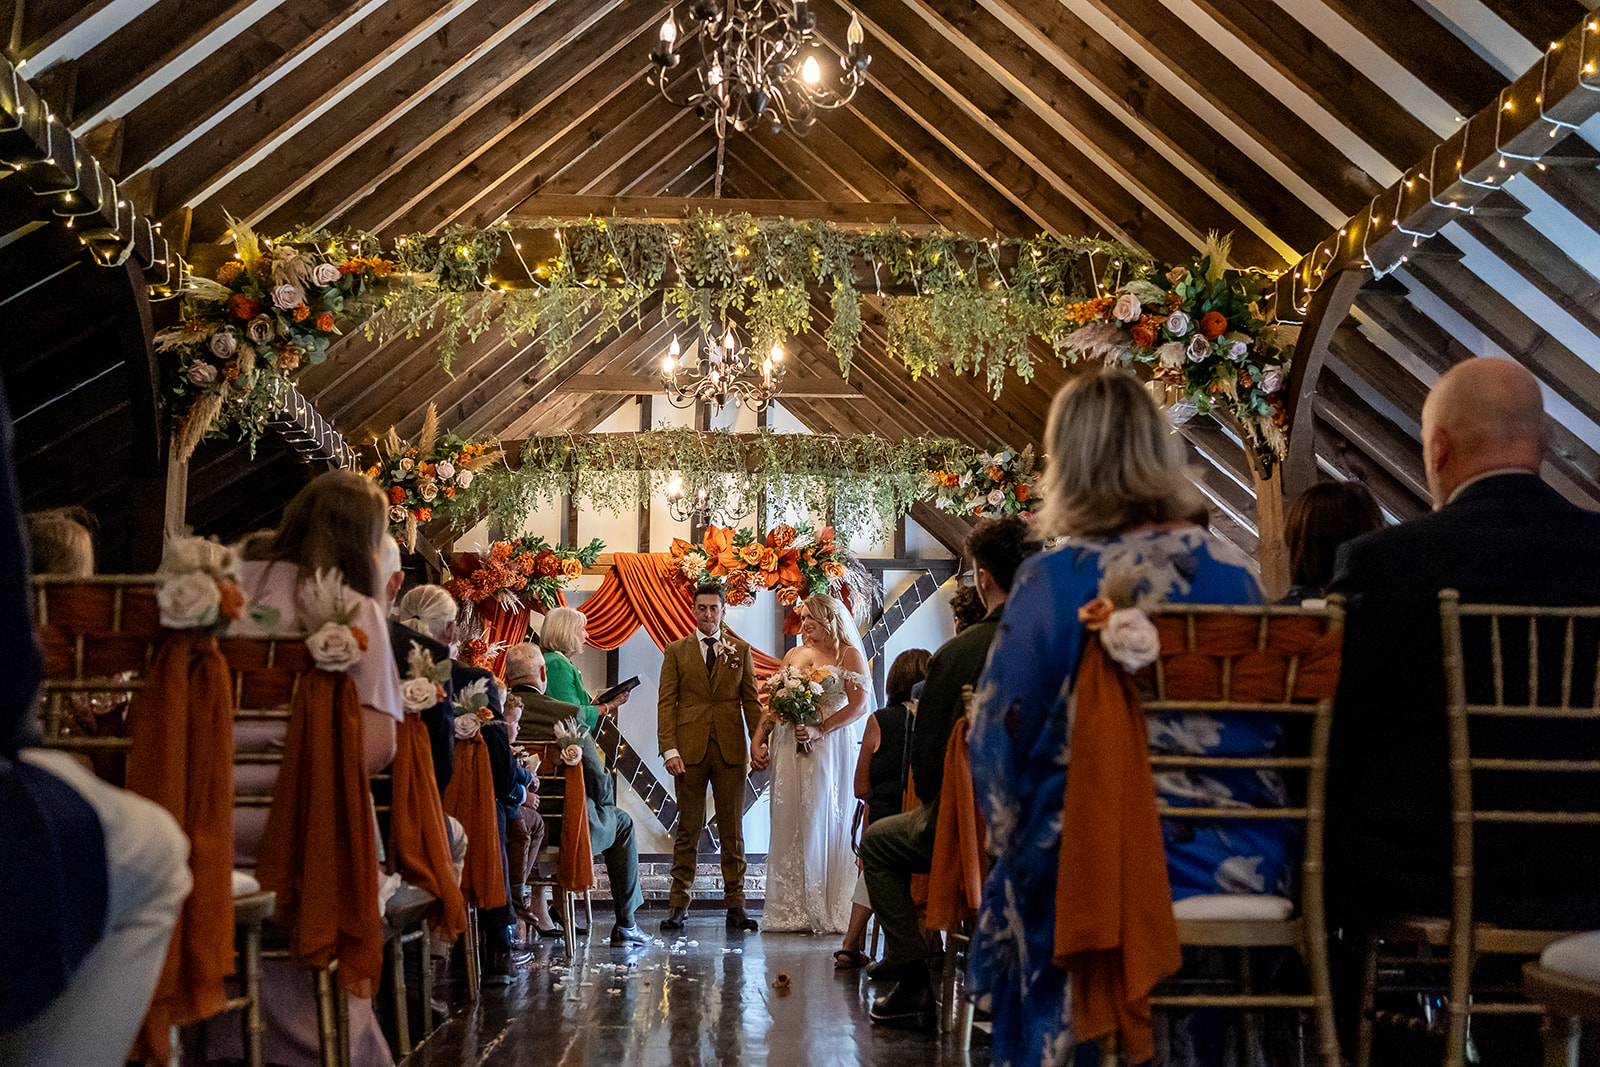 Guests watching bride and groom get married in the Tudor Barn at Blackstock Country Estate